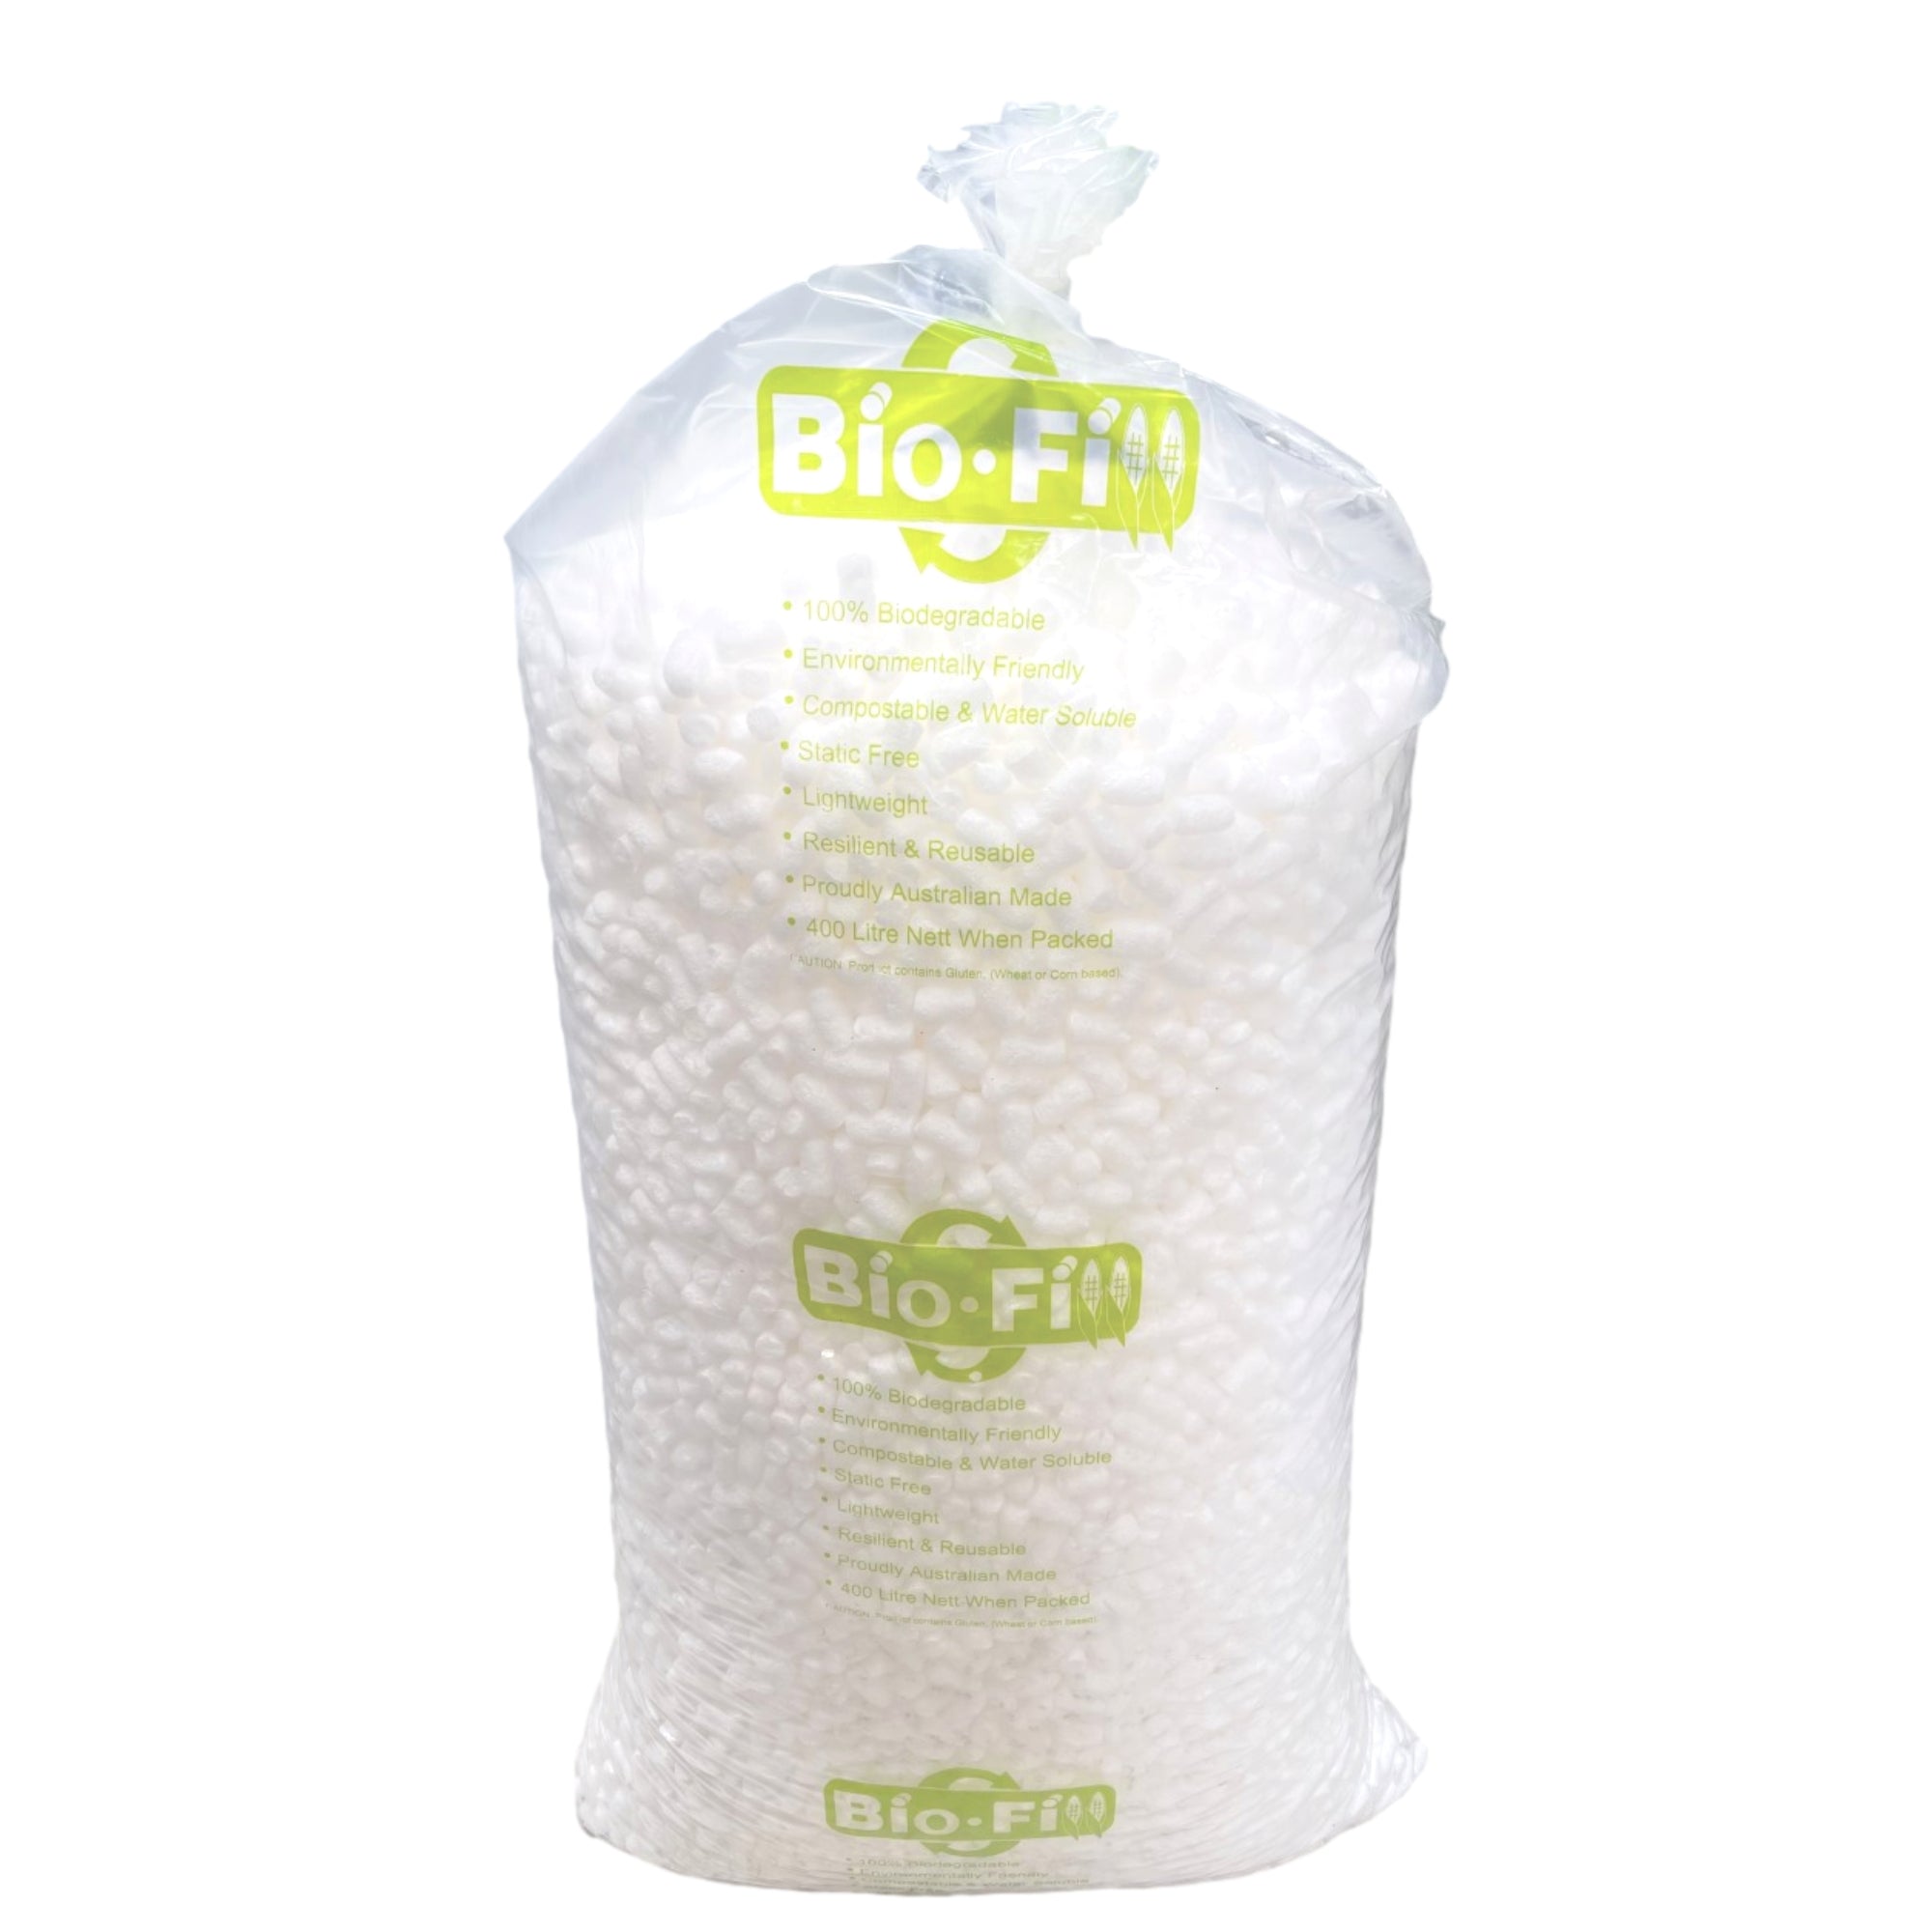 Why You Should Use Biodegradable Packing Peanuts for your eCommerce Business